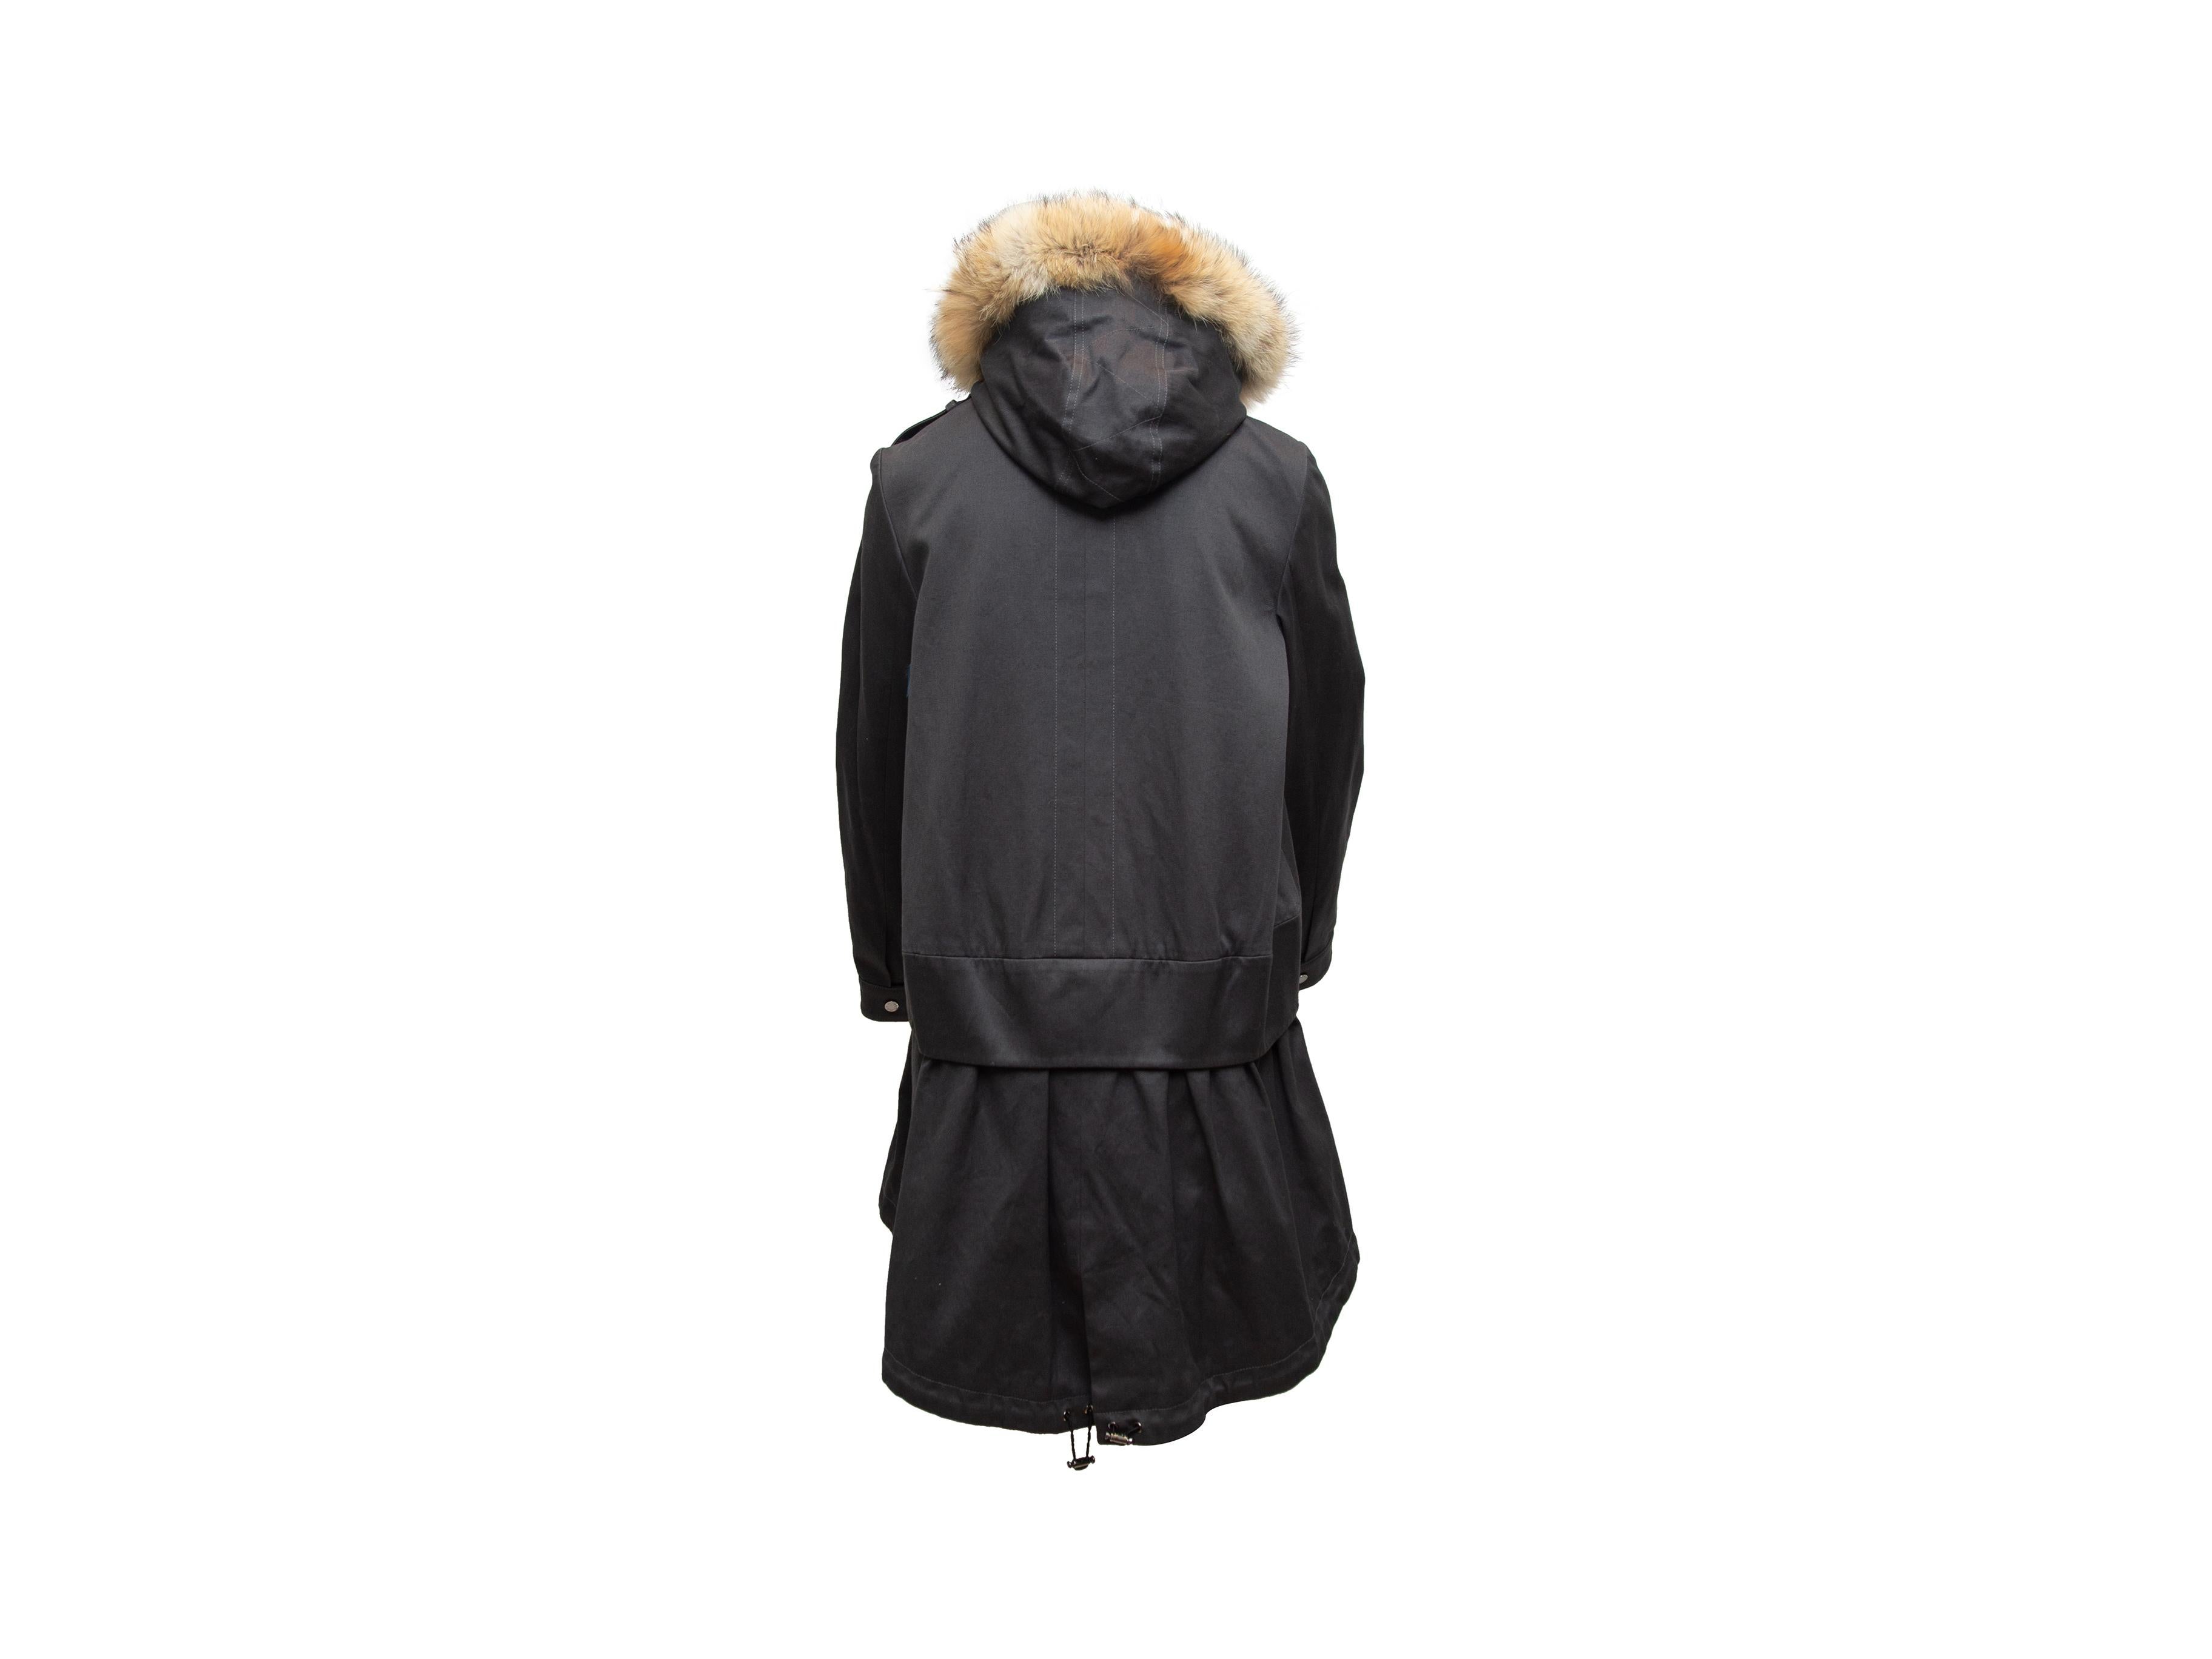 Product details: Grey cotton parka by Ashley B. Fur-trimmed hood. Dual hip pockets. Zip and snap closures at front. 39